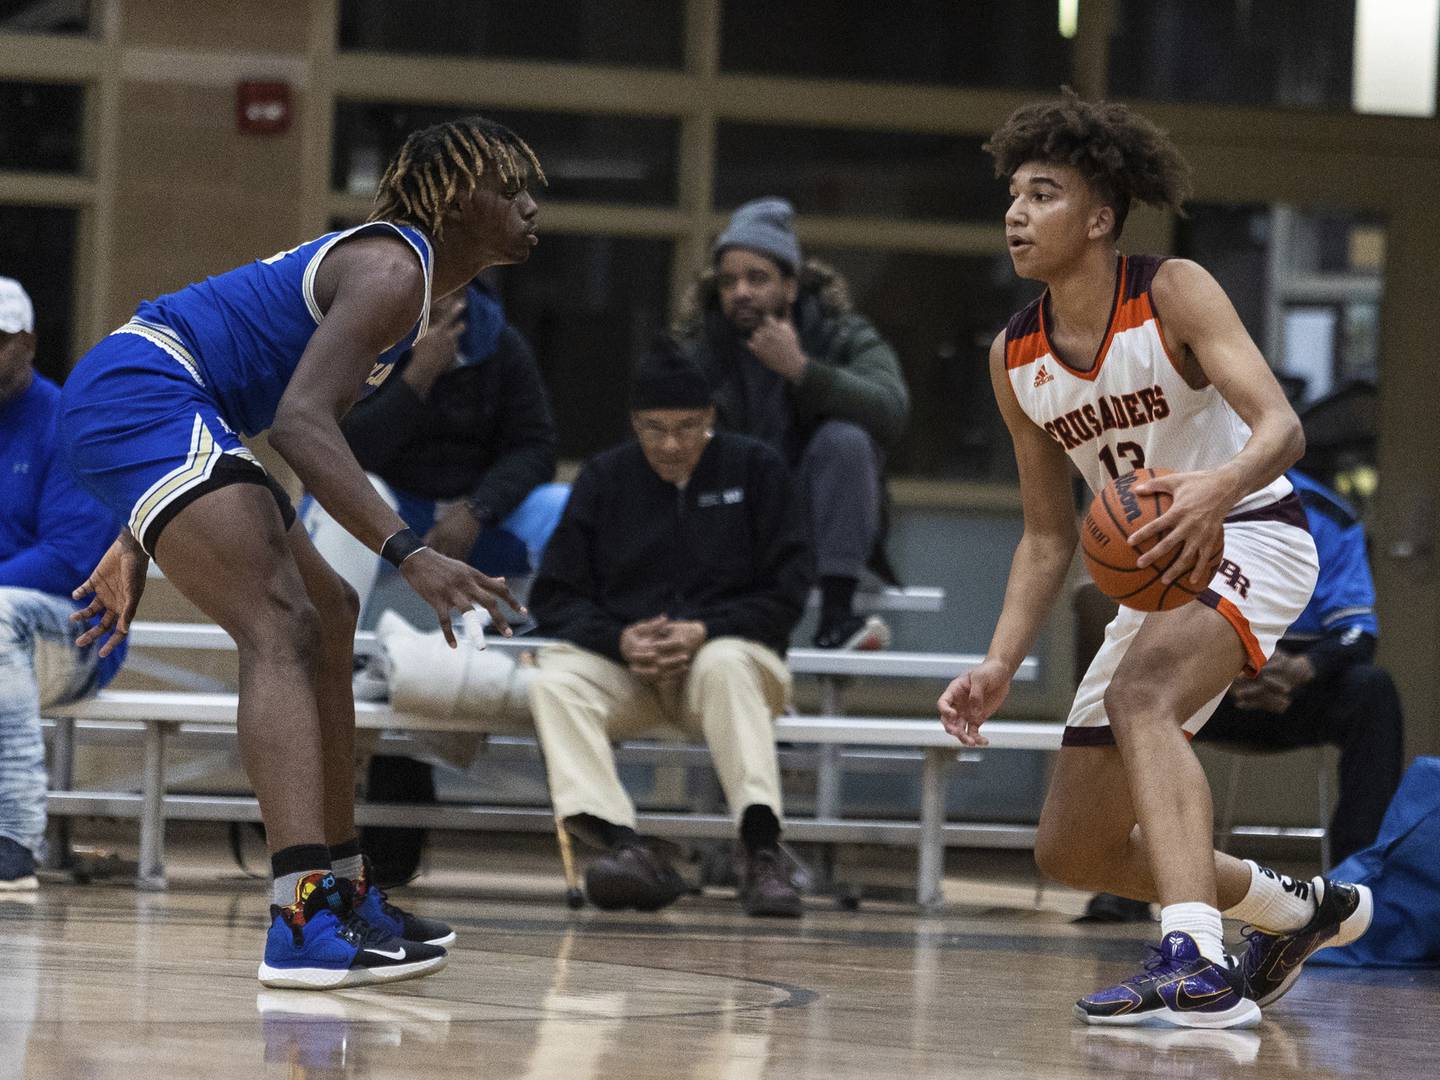 Brother Rice's Zavier Fitch (13) dribbles looking for an open lane against Bloom in the Team Rose Classic at Mount Carmel in Chicago on Sunday, Dec. 11, 2022.